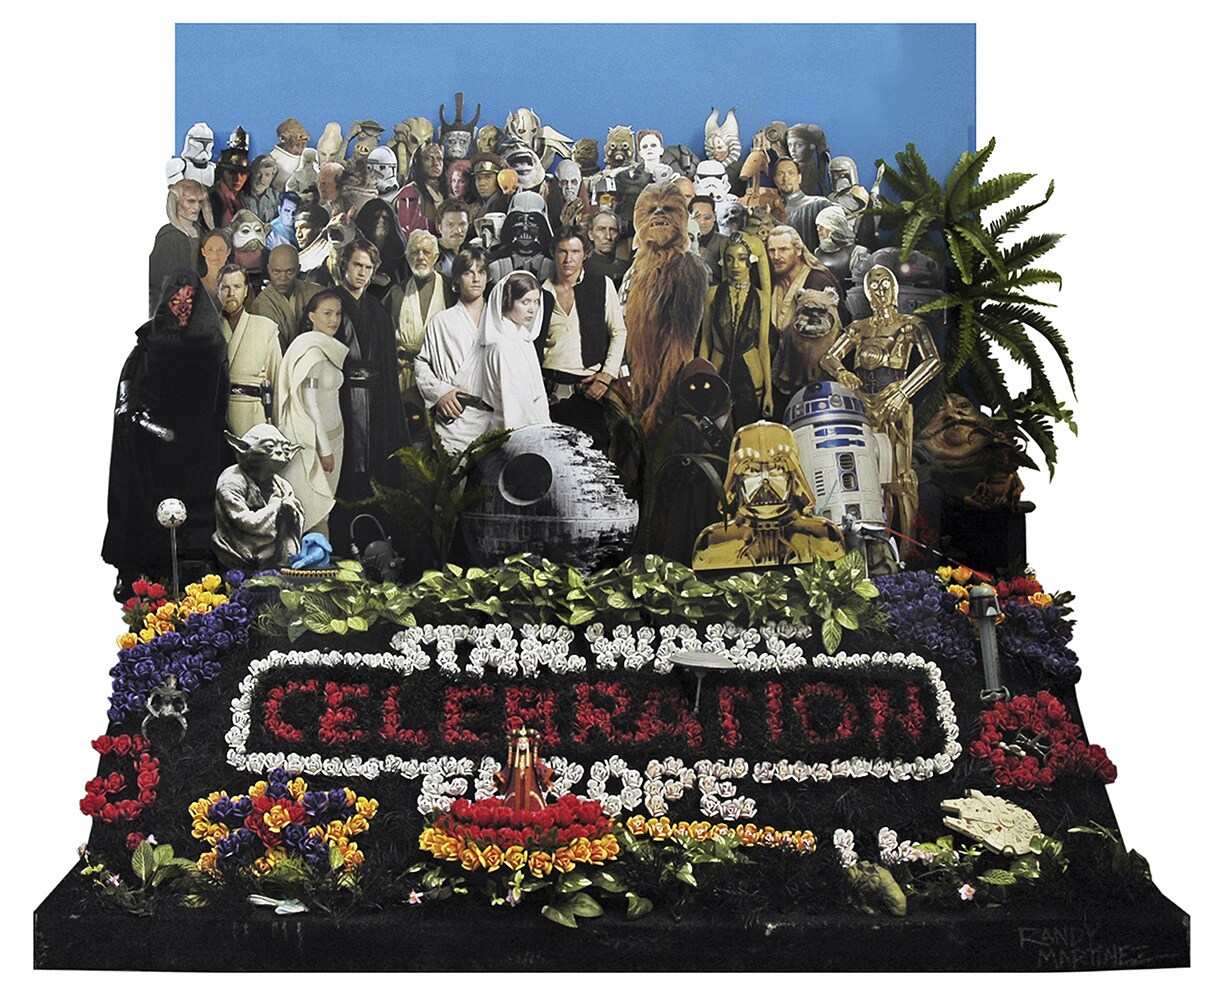 The key art for Star Wars Celebration Europe in 2007 was created by artist Randy Martinez, who was inspired by what was then the 40th anniversary of “Sgt. Pepper’s Lonely Hearts Club Band” by the English group, The Beatles. 